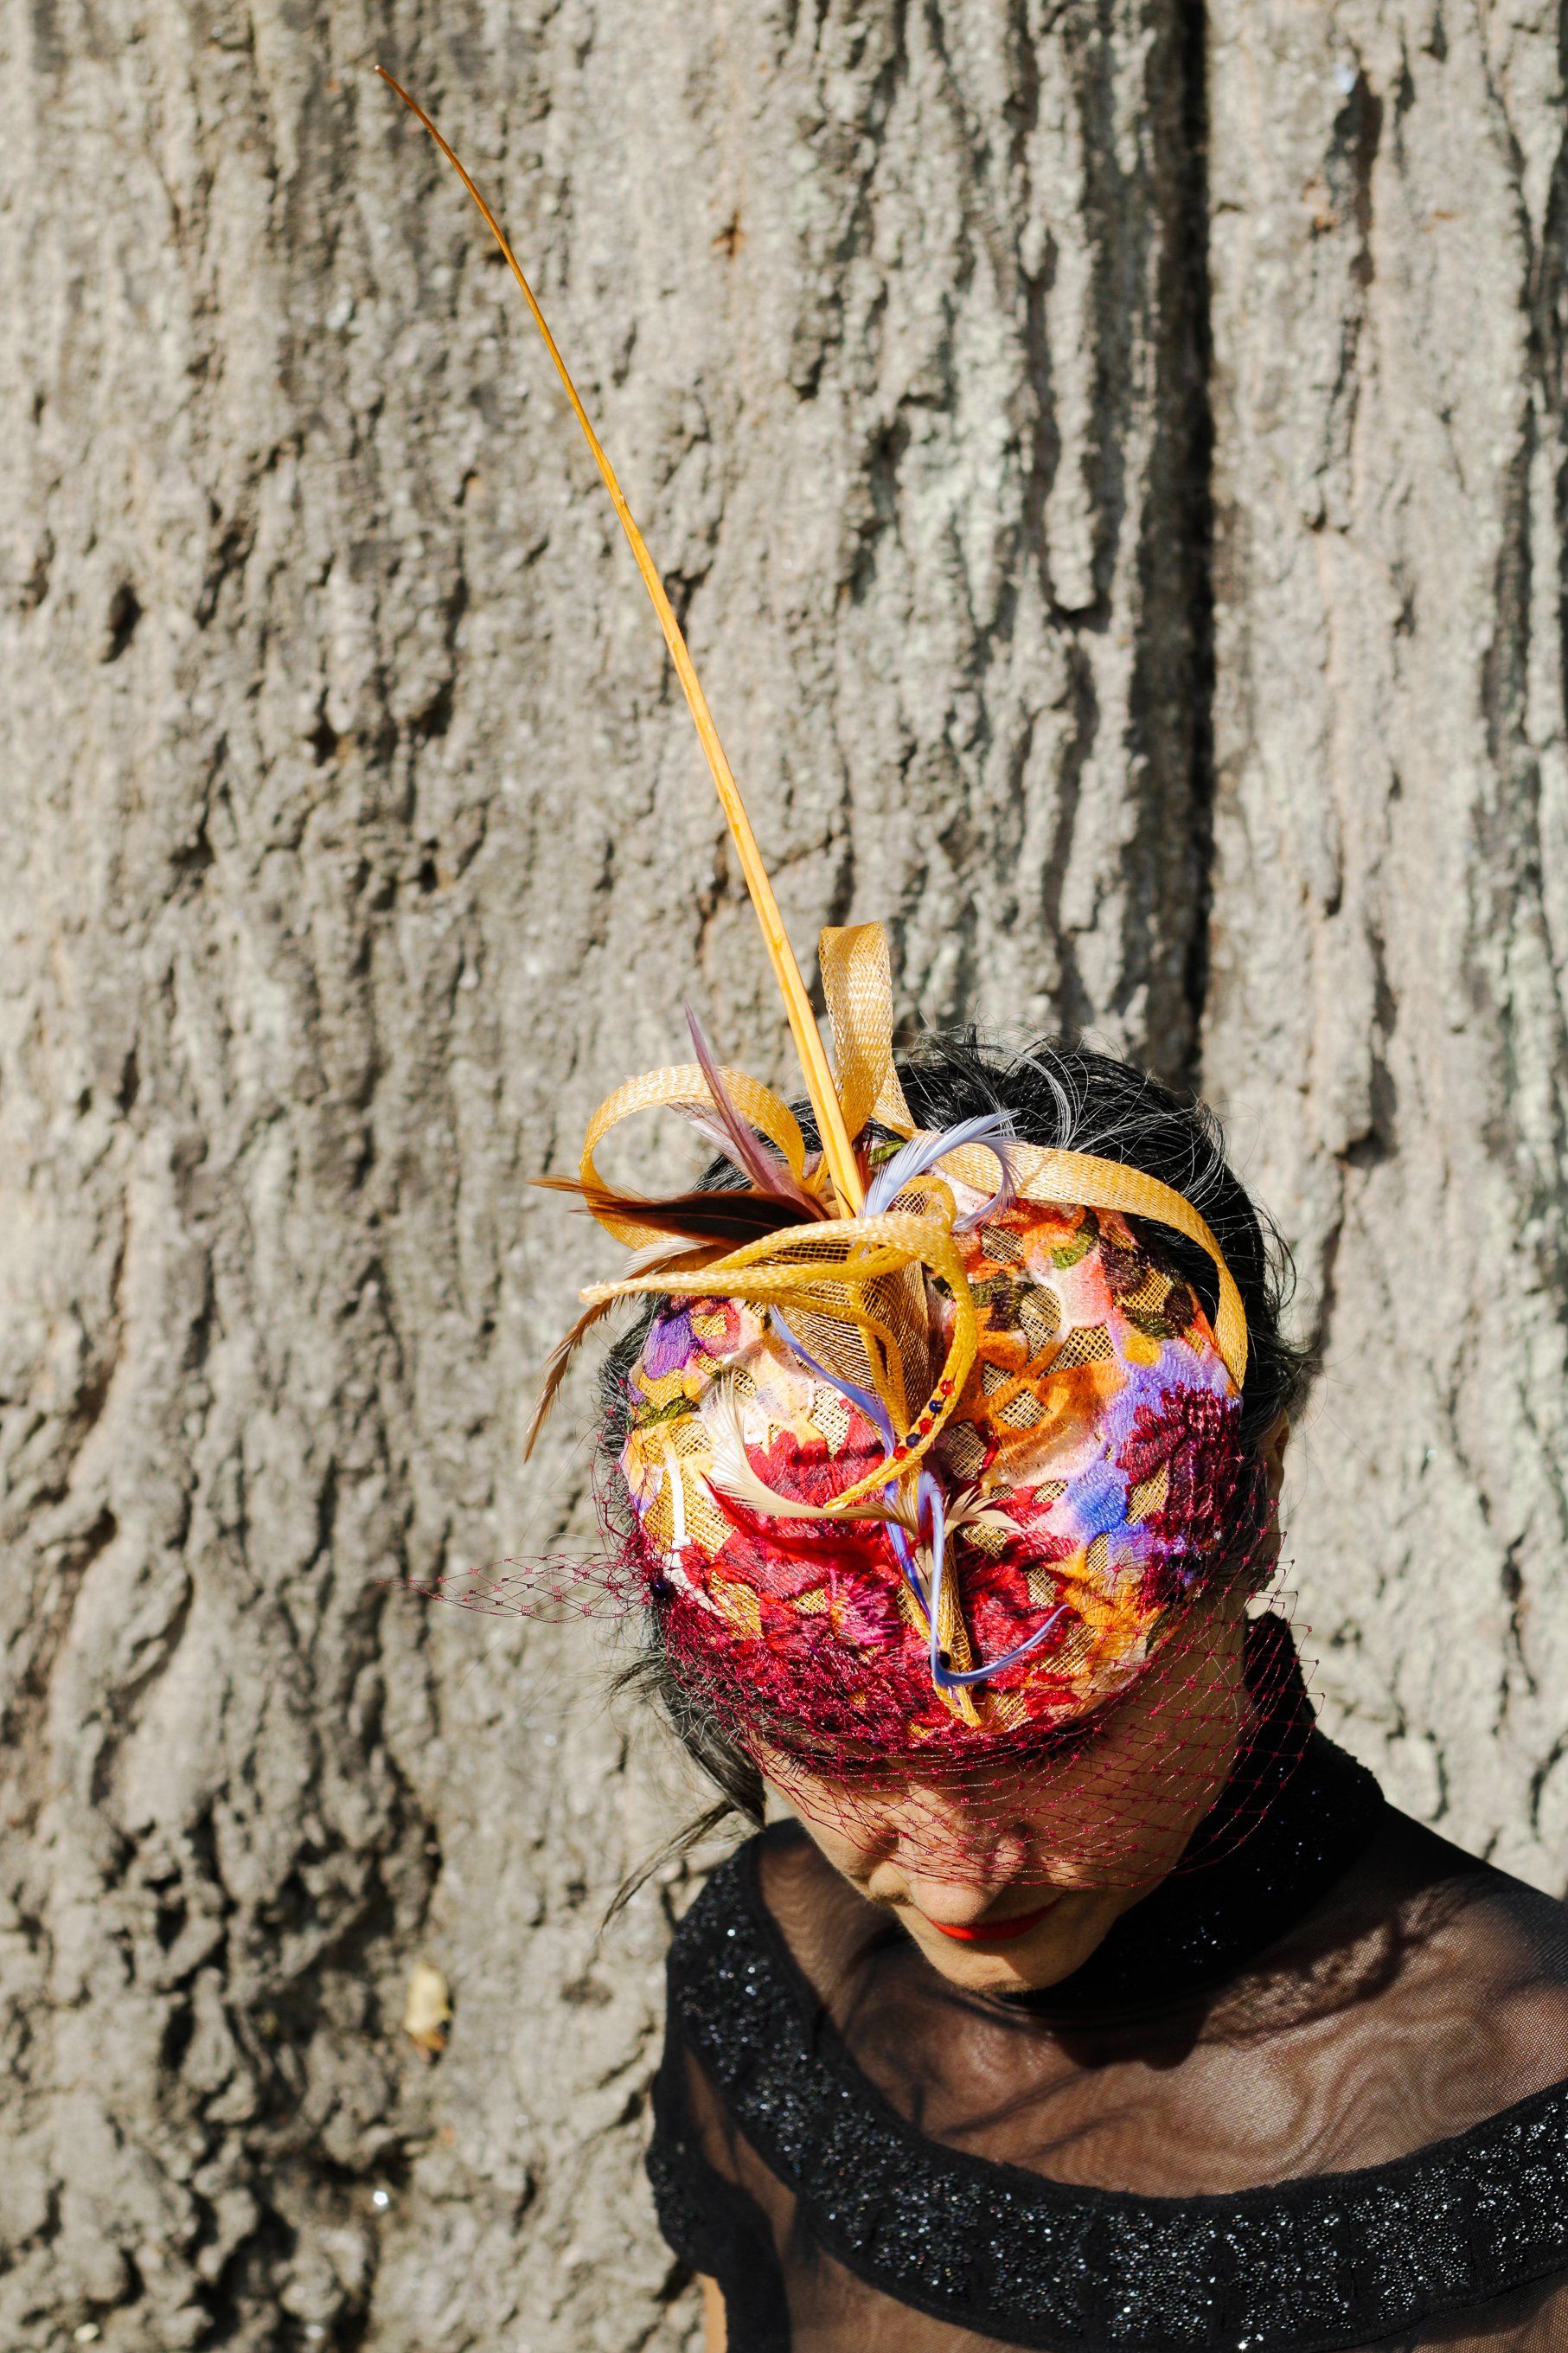 the model wears a navy beret  made in sinamay. Trimmed with feathers and  net covering her eyes.